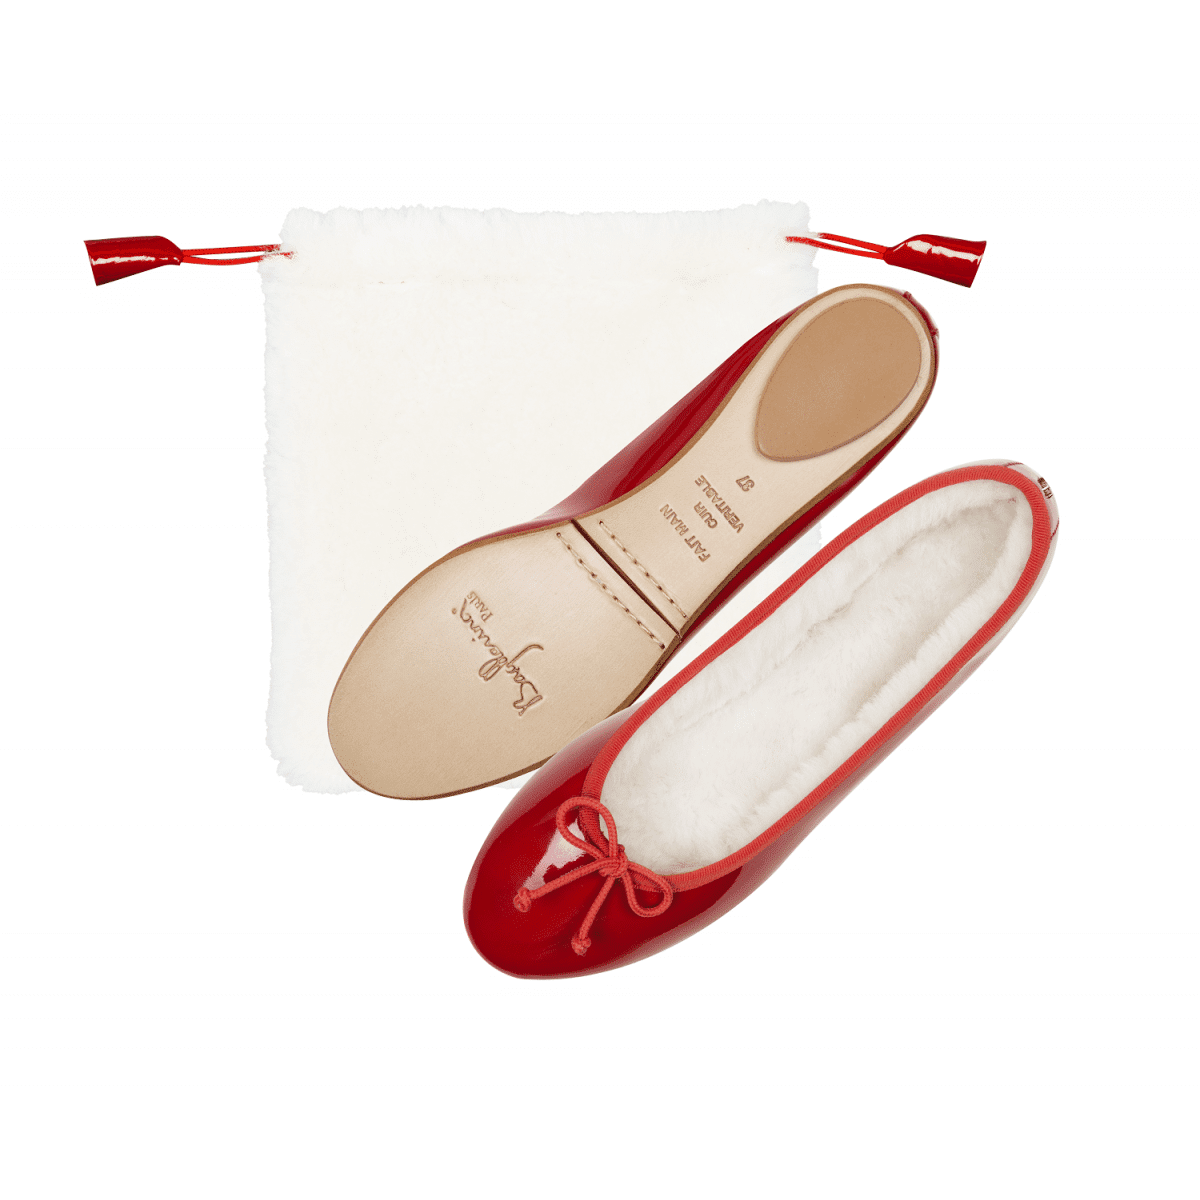 Red patent leather ballet flats with fur